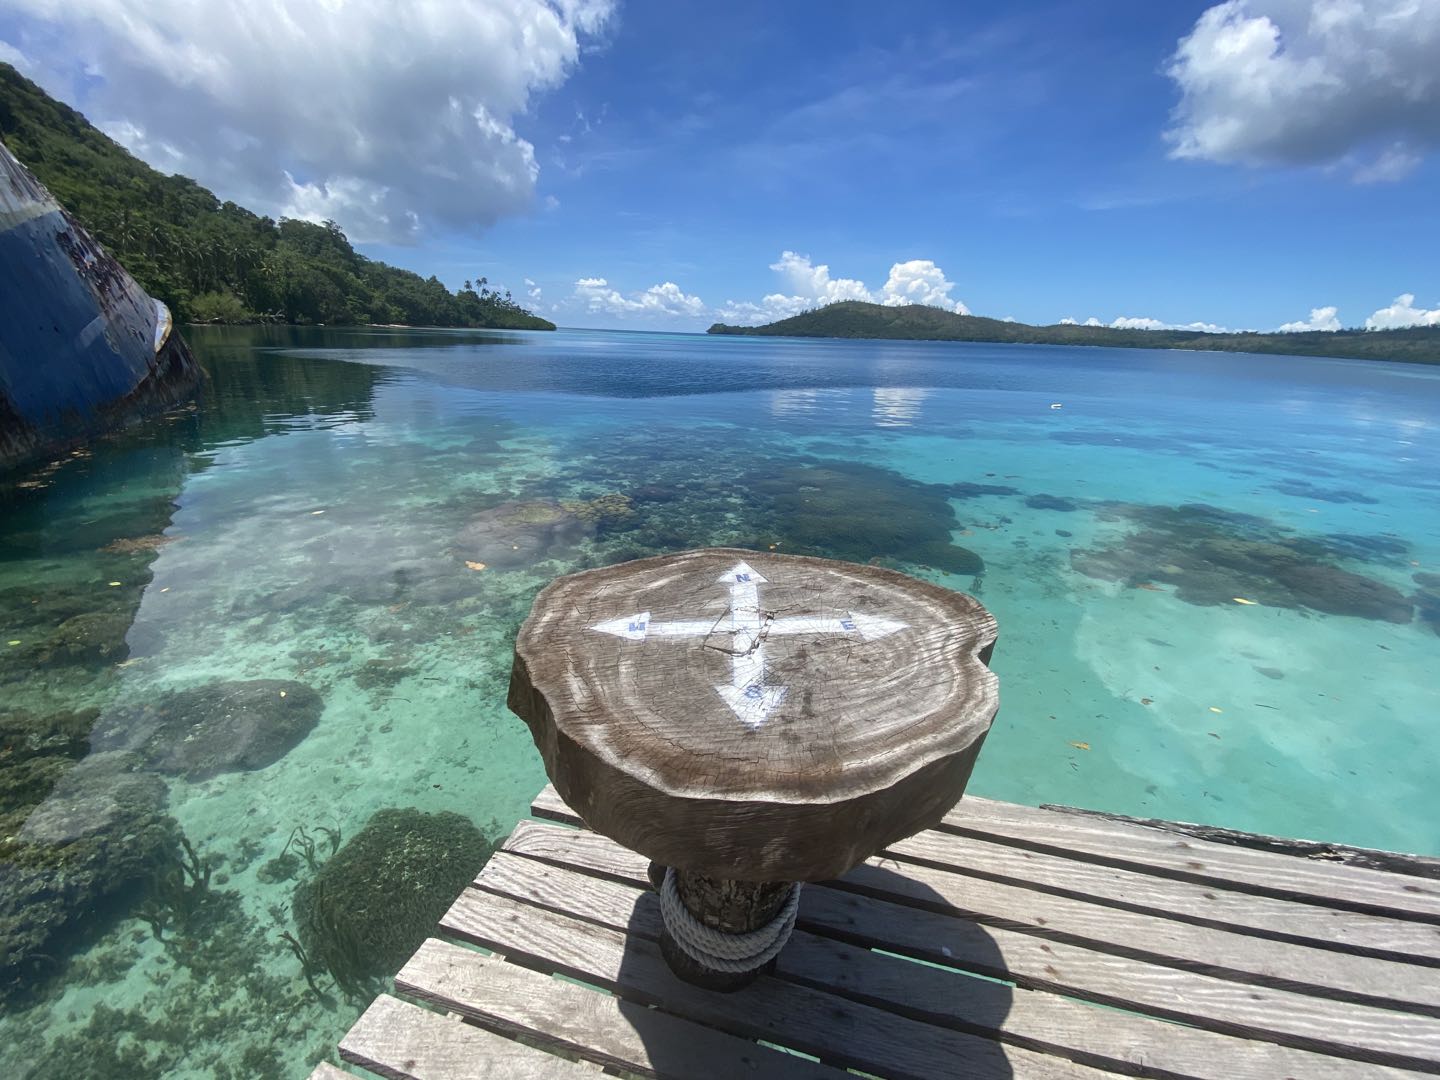 solomon islands national tourism policy